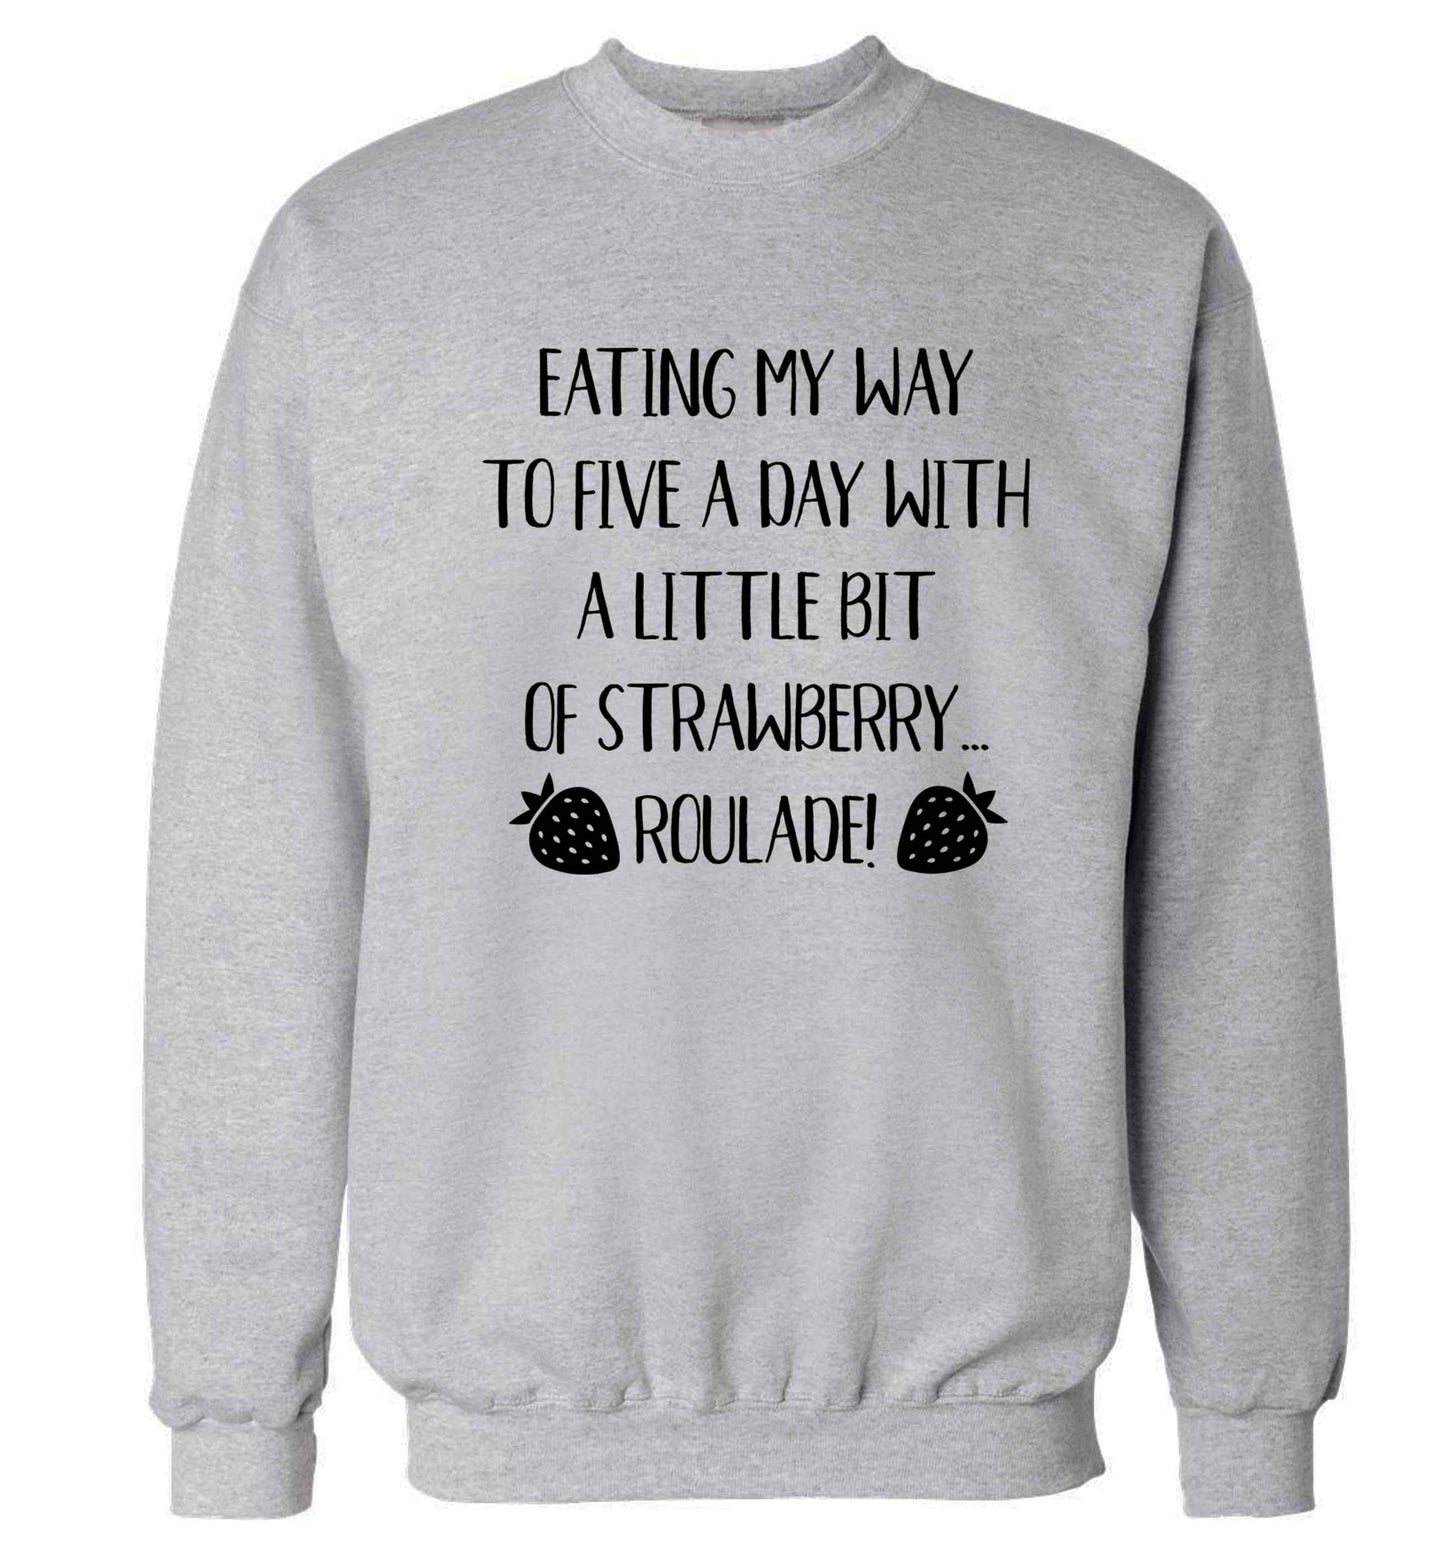 Eating my way to five a day with a little bit of strawberry roulade Adult's unisex grey Sweater 2XL